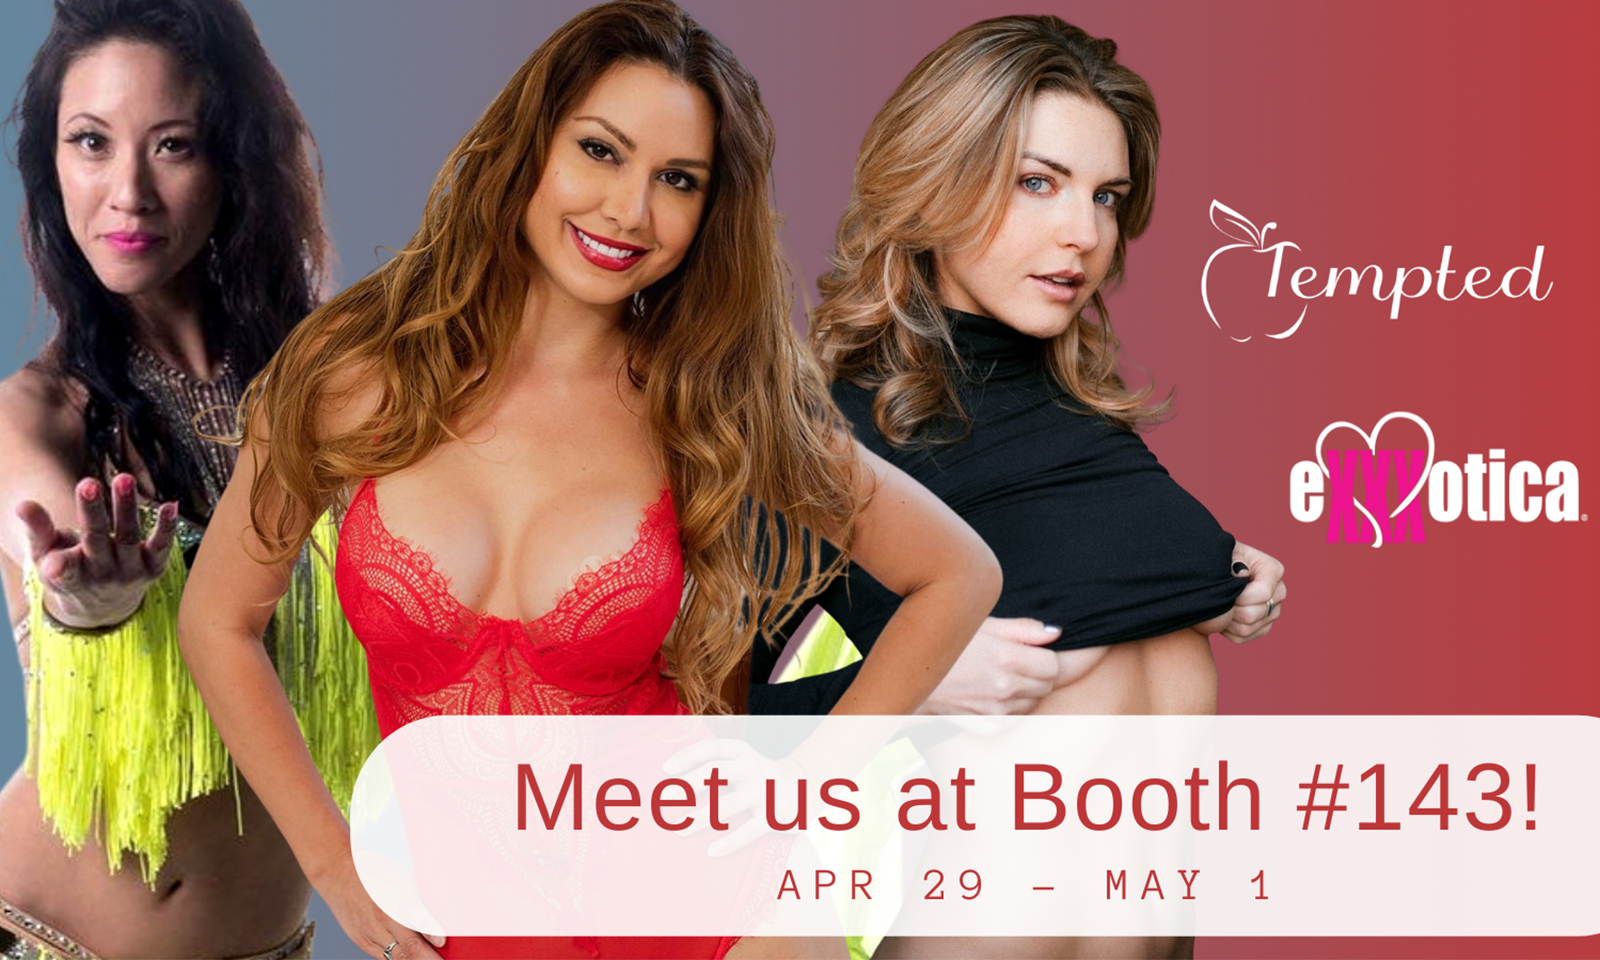 Lineup of Models Set for 1st Tempted Booth at Exxxotica Chicago